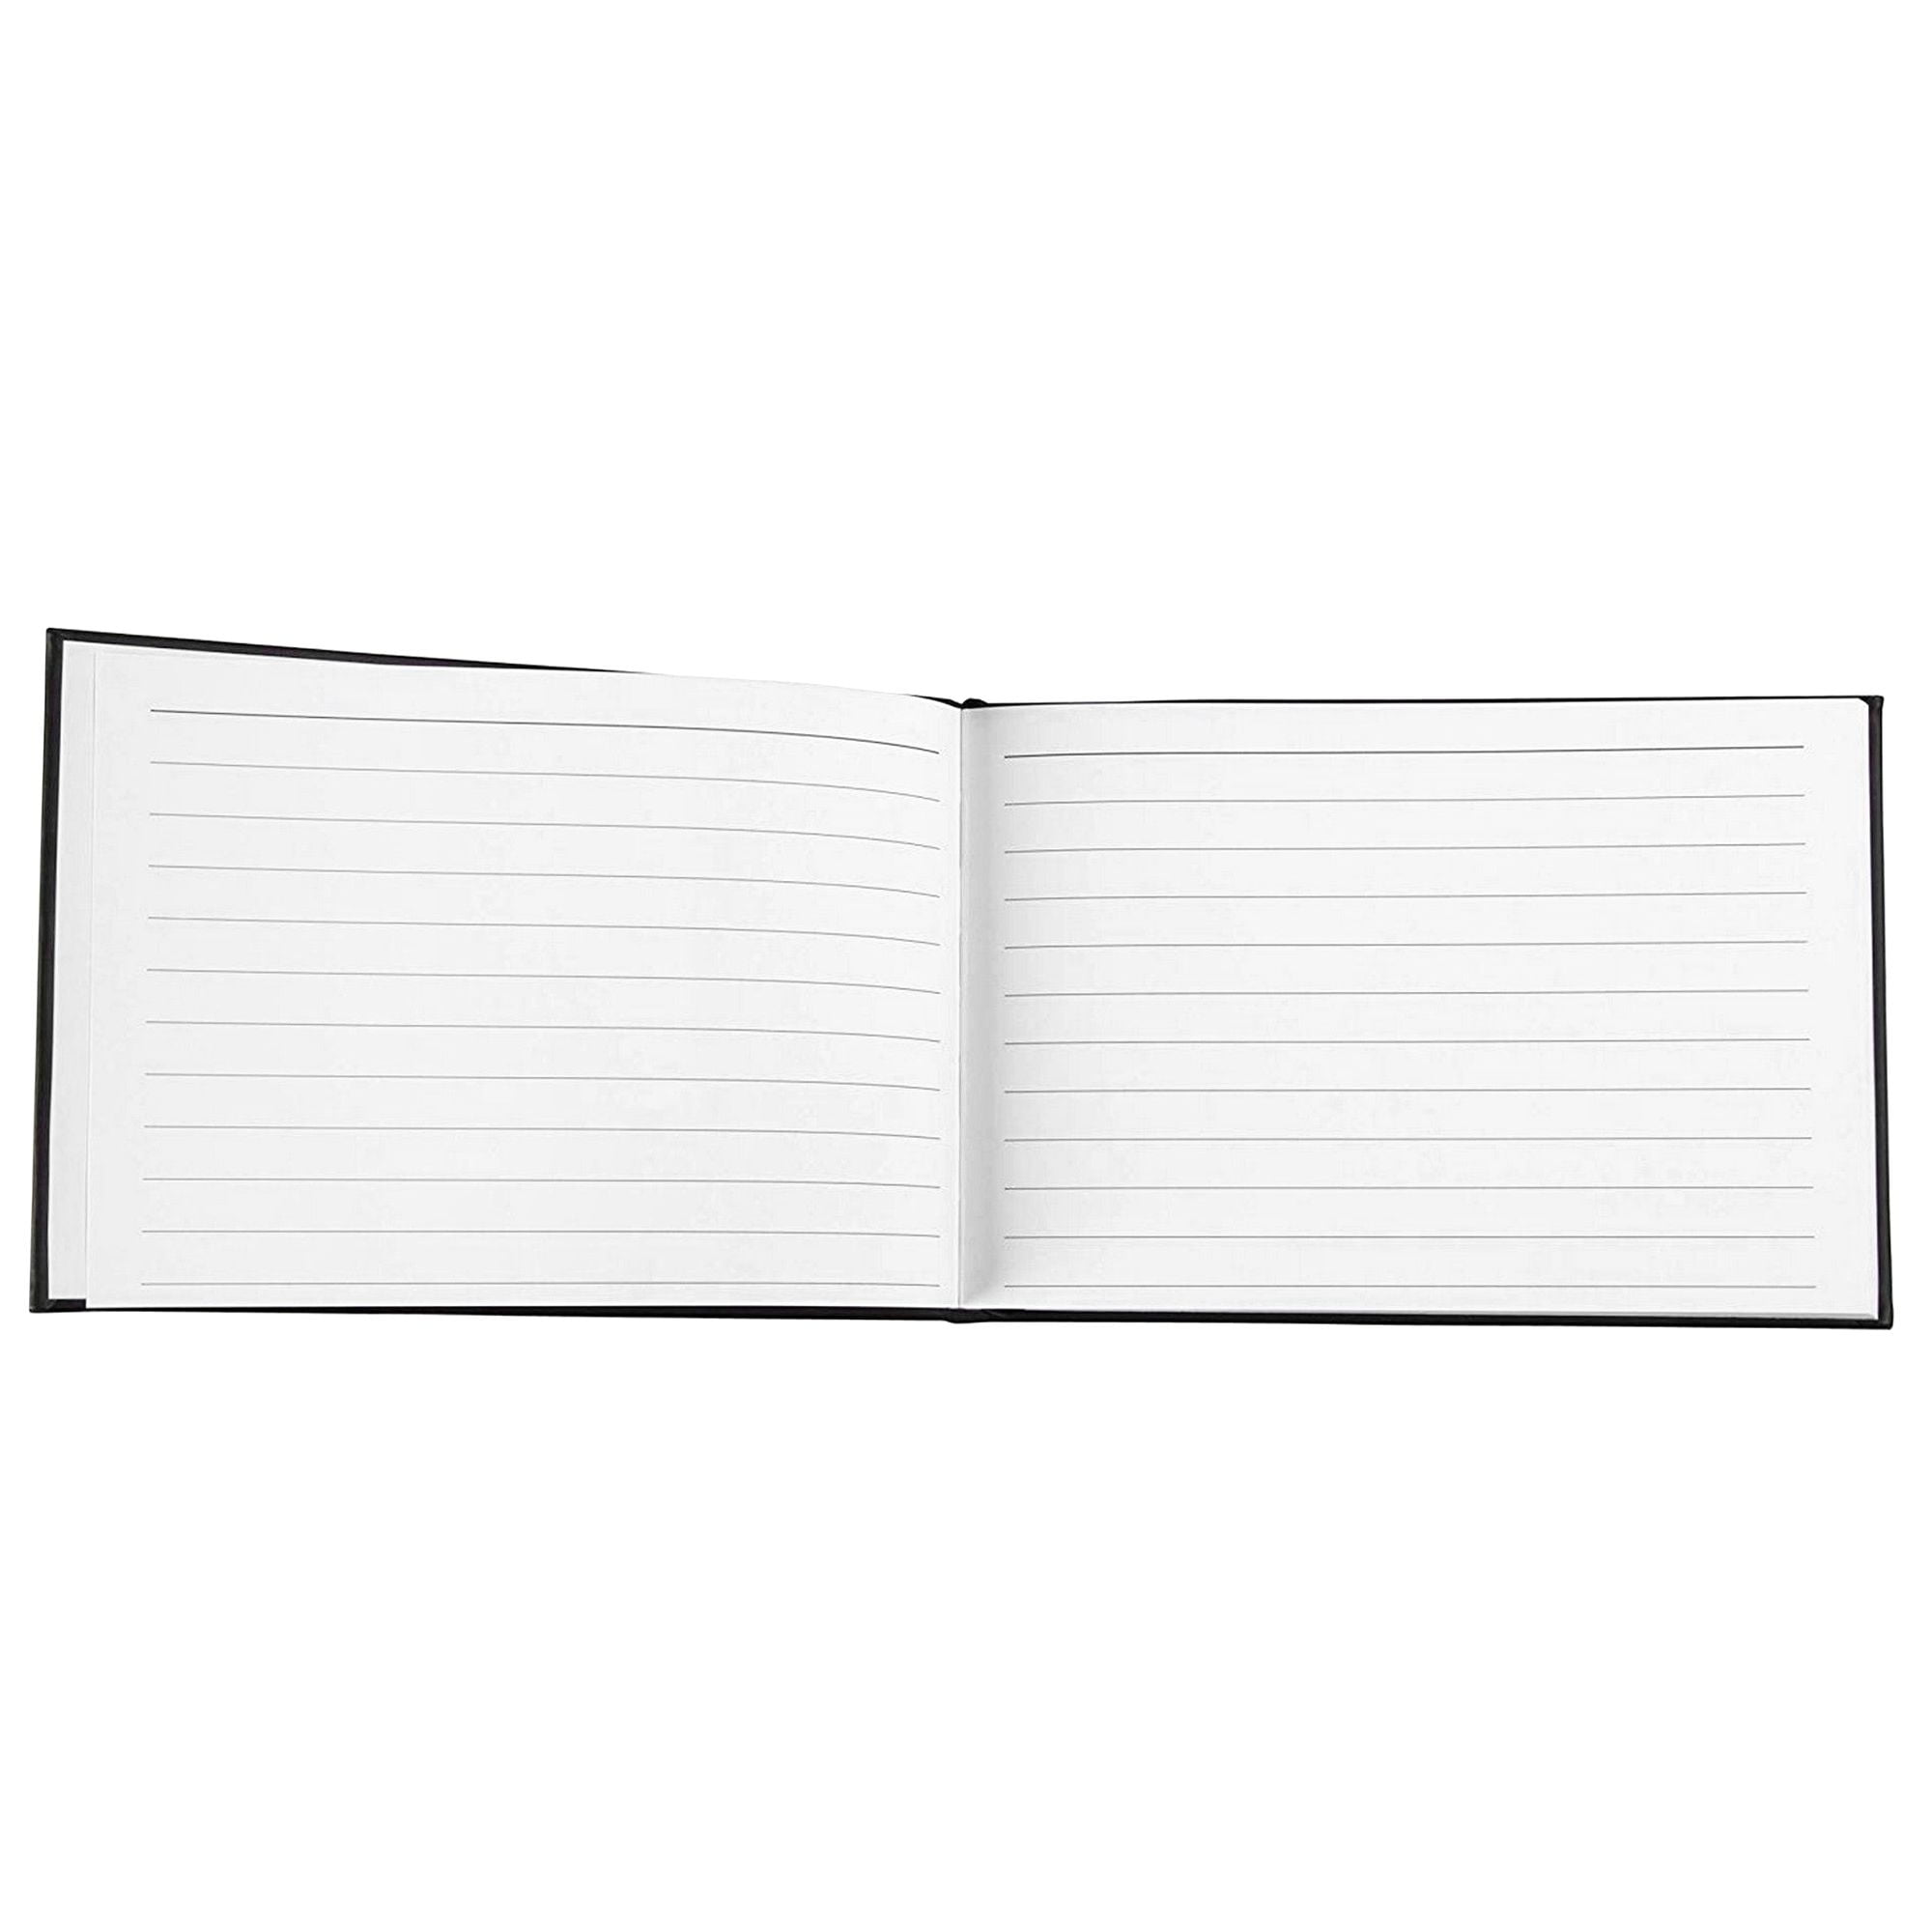 Black Funeral Guest Book for Memorial Service with 130 Pages, Gold